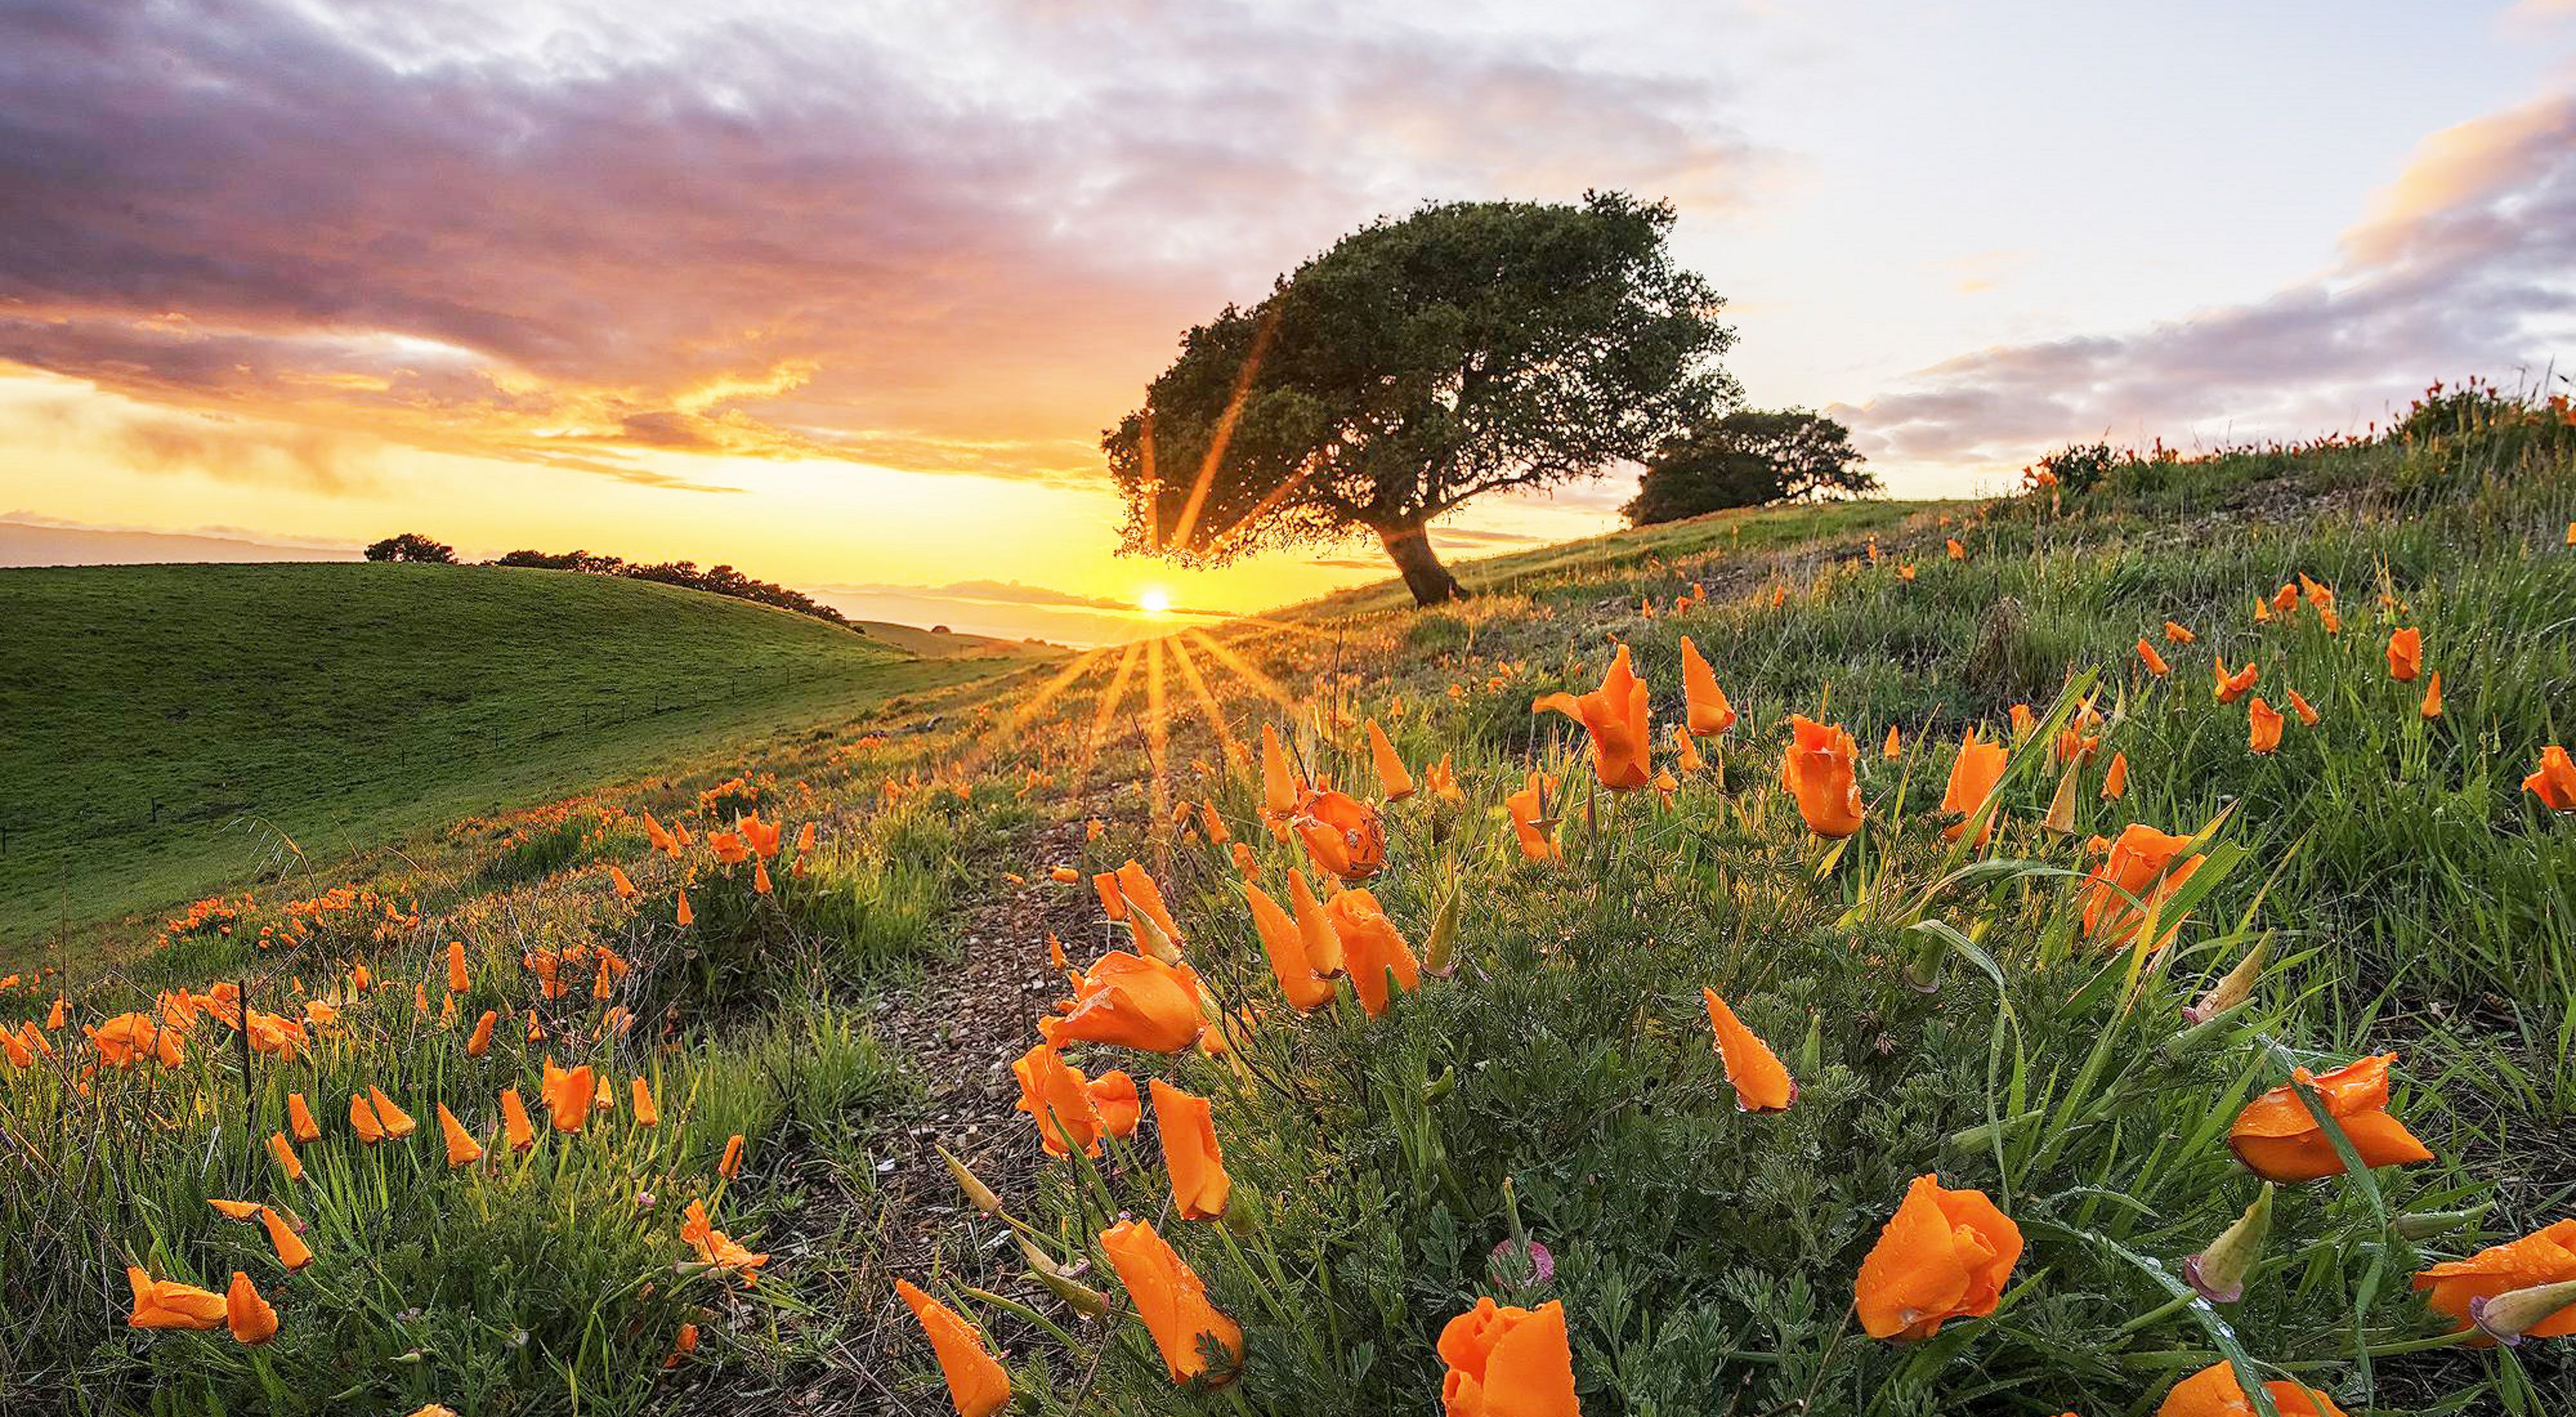 A sunset after a rain in California poppy-covered hills.